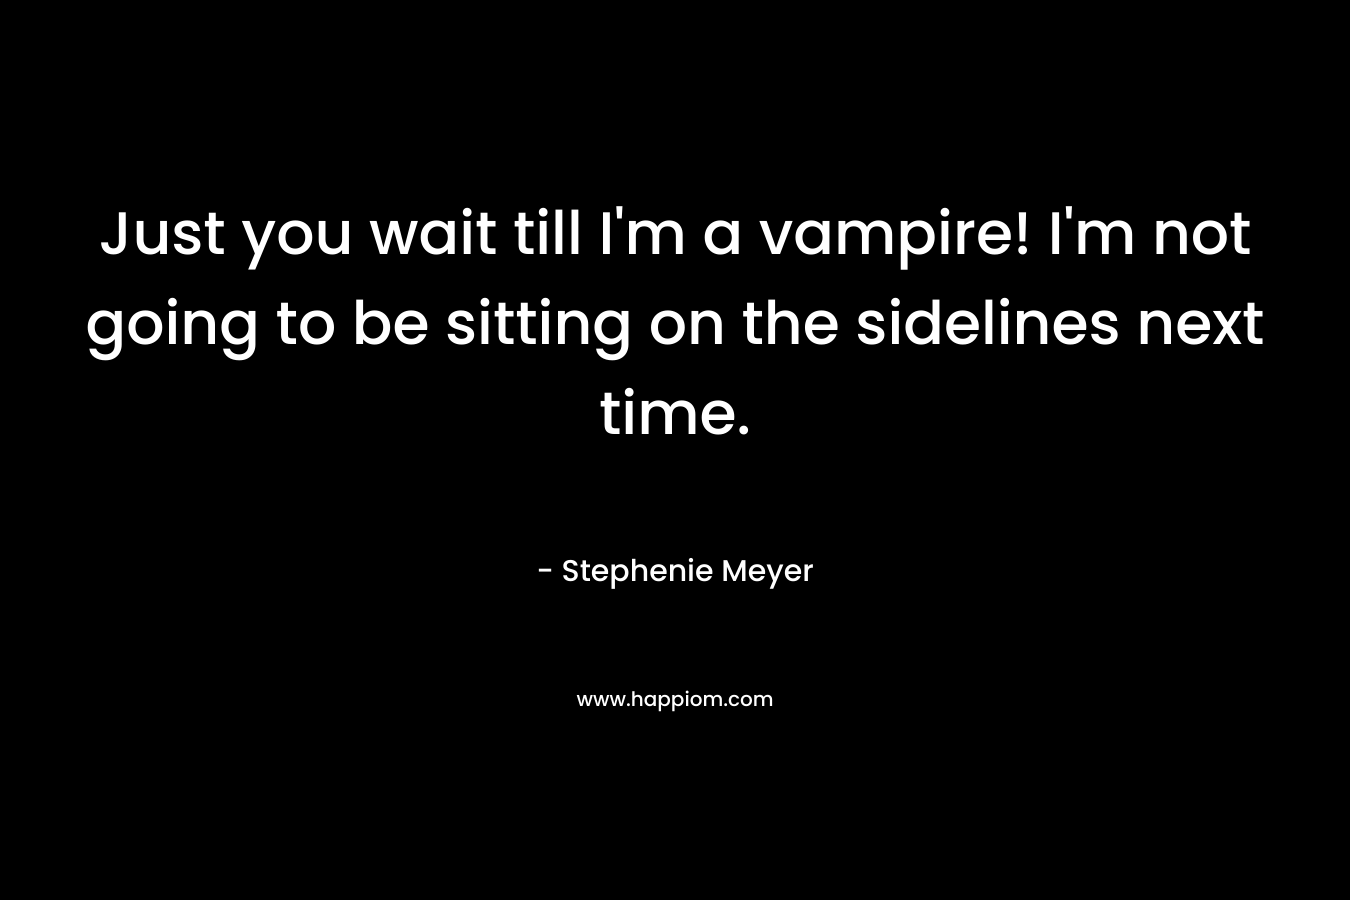 Just you wait till I’m a vampire! I’m not going to be sitting on the sidelines next time. – Stephenie Meyer